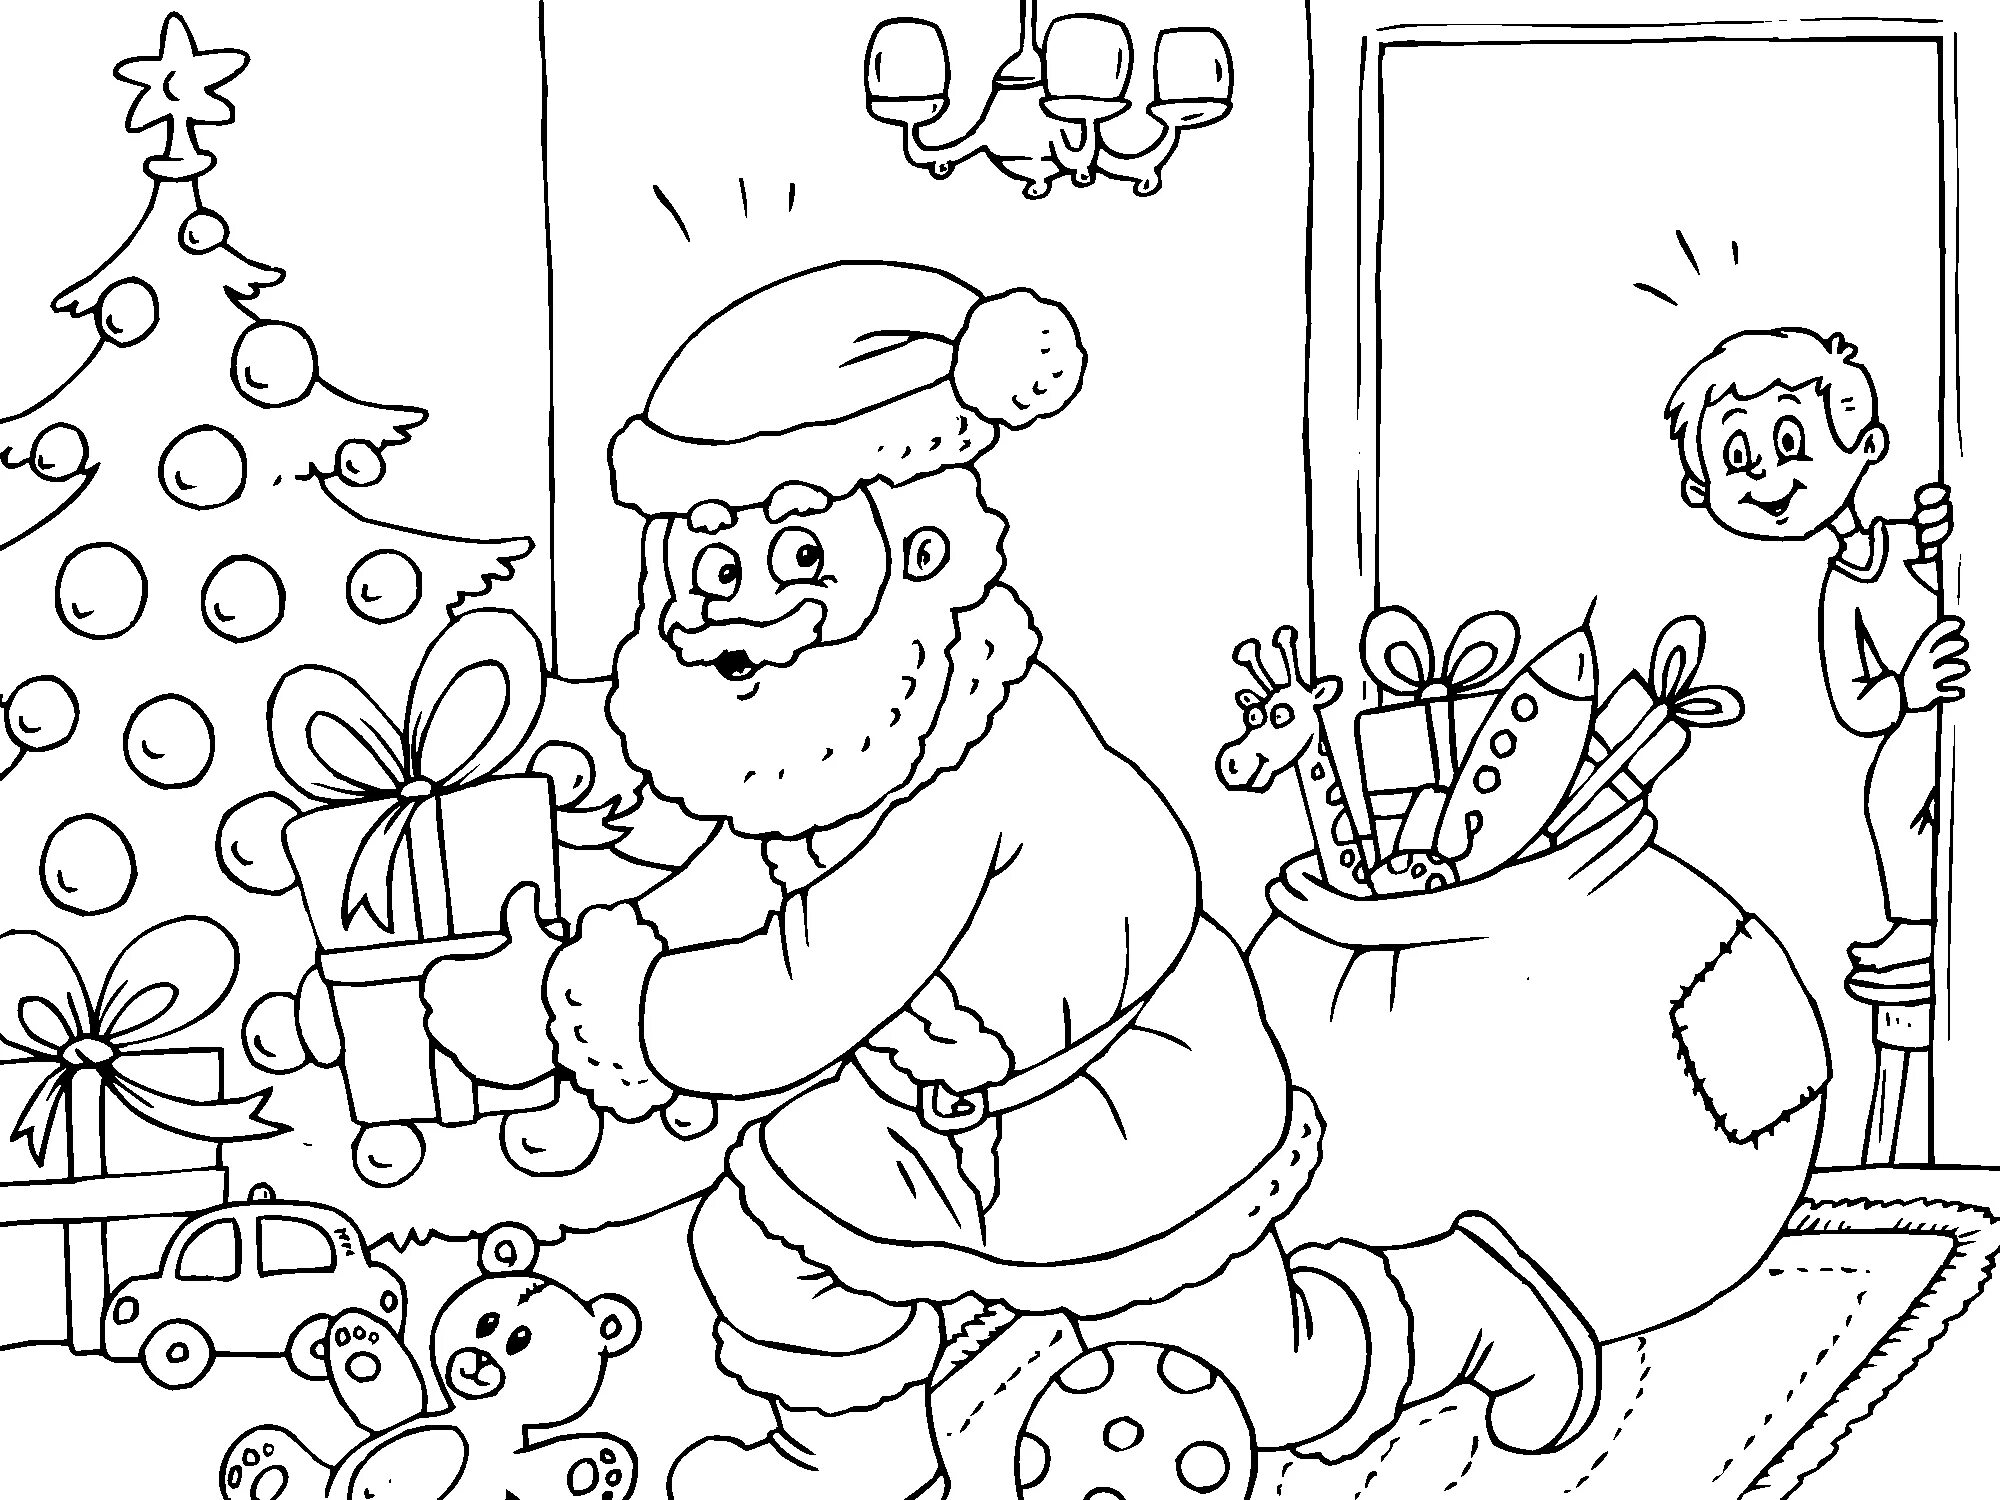 Santa Claus and Christmas tree for kids #5